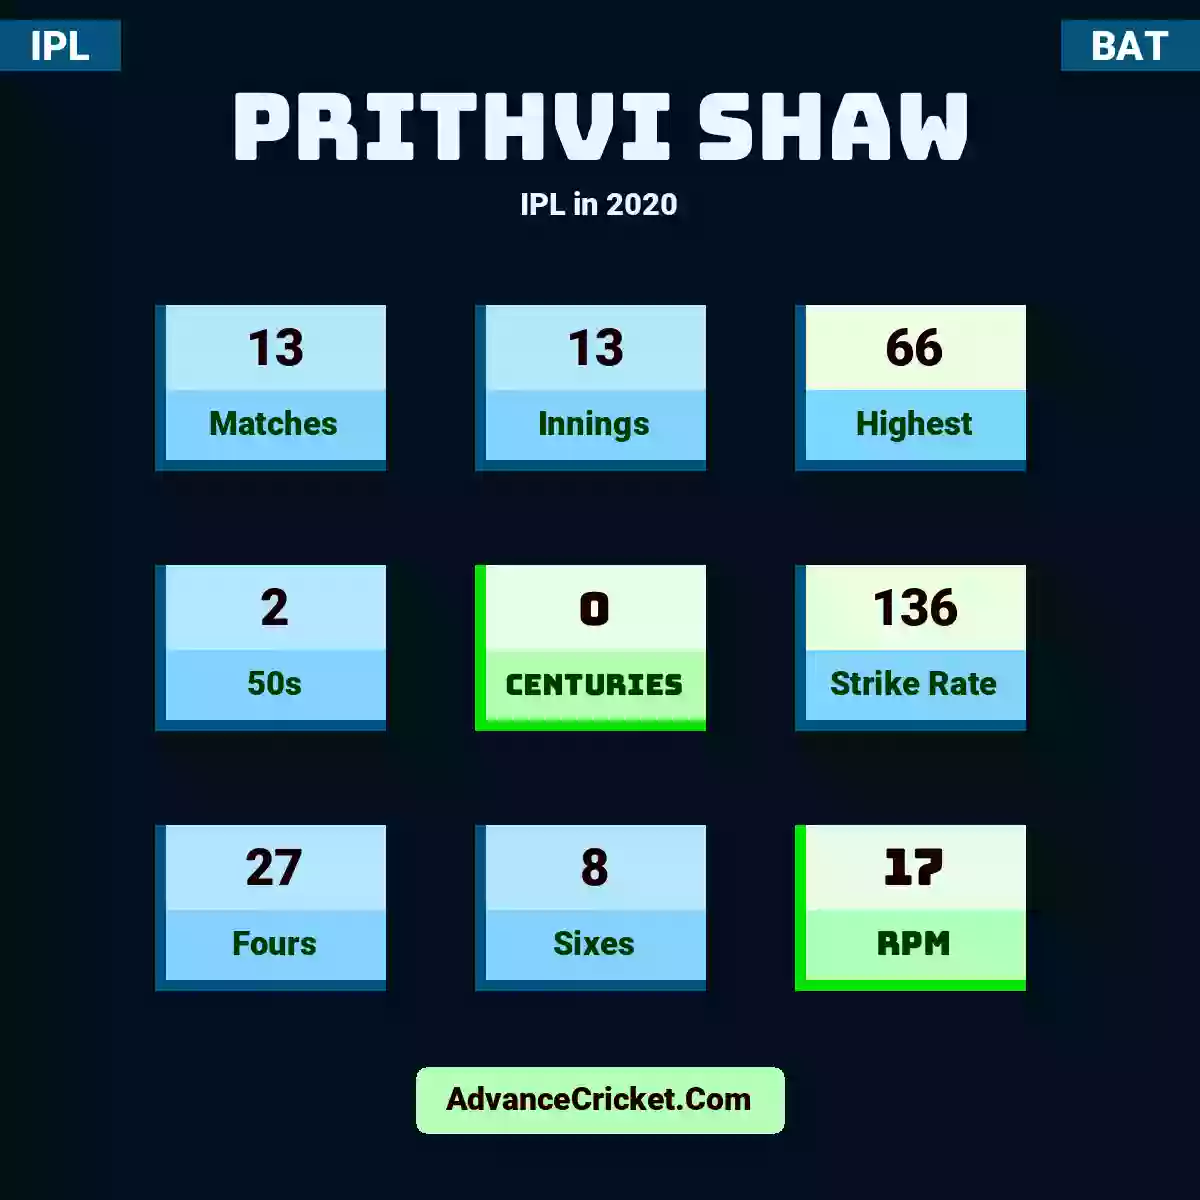 Prithvi Shaw IPL  in 2020, Prithvi Shaw played 13 matches, scored 66 runs as highest, 2 half-centuries, and 0 centuries, with a strike rate of 136. P.Shaw hit 27 fours and 8 sixes, with an RPM of 17.